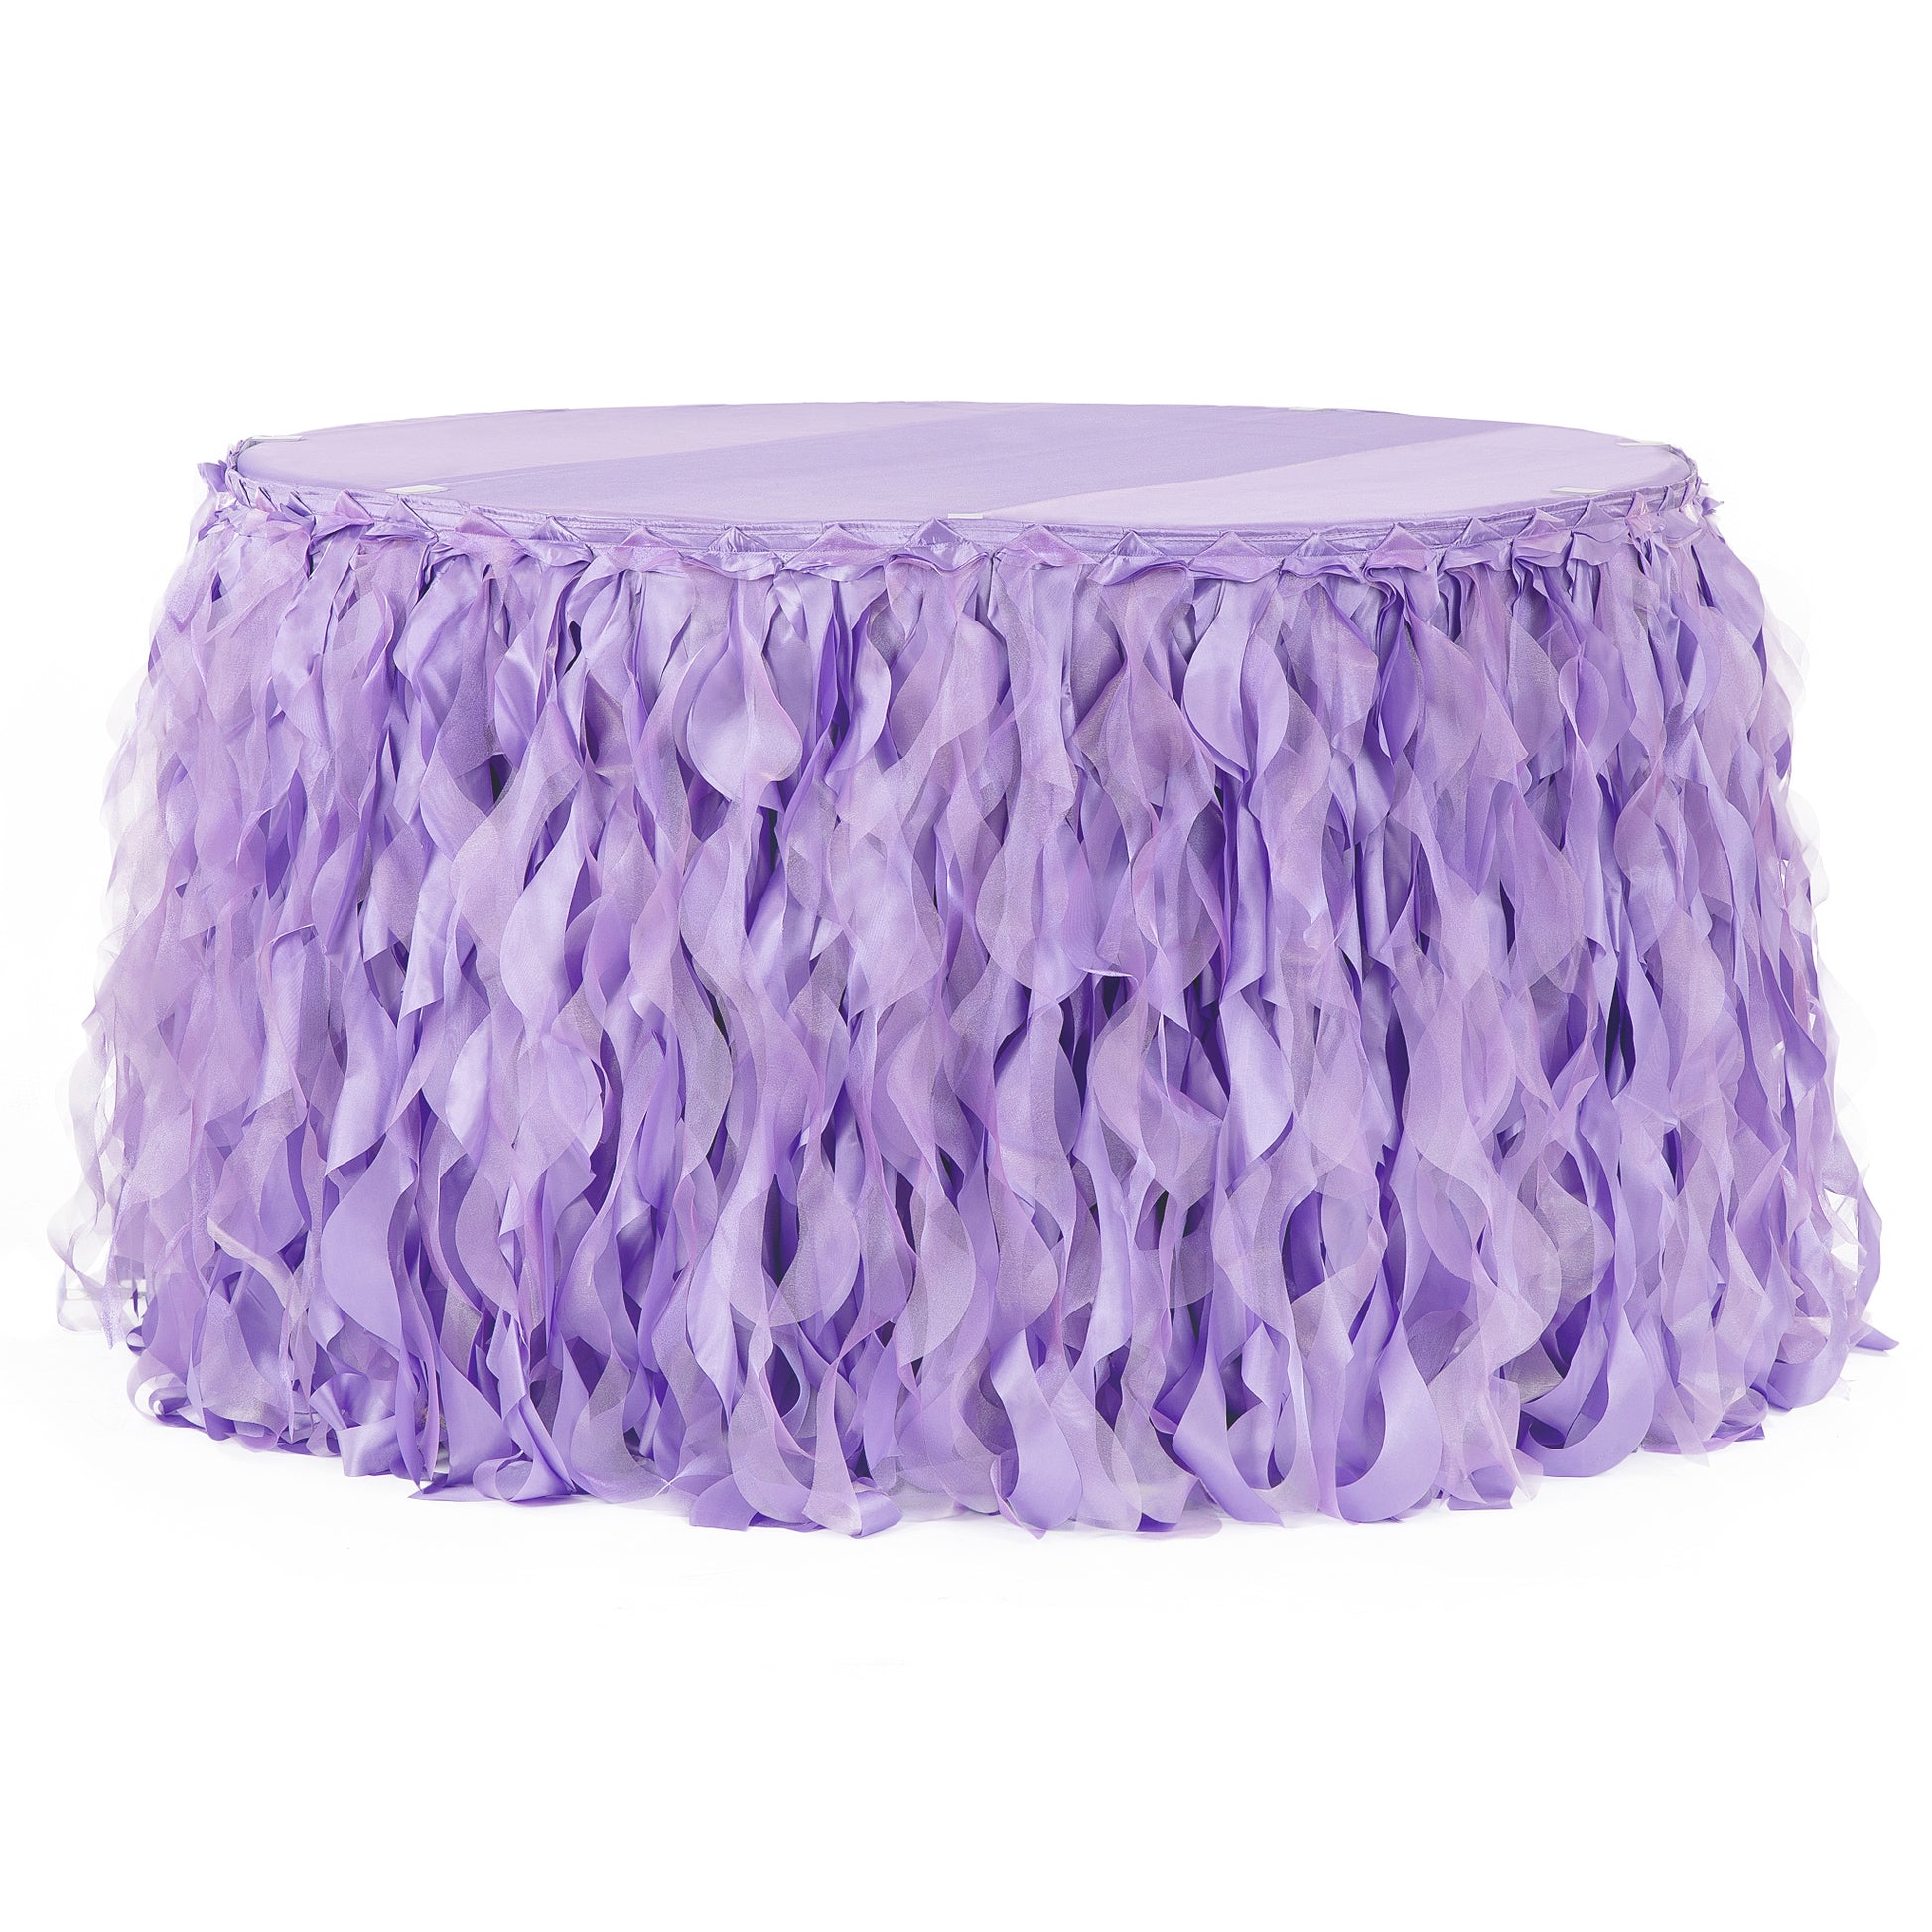 Curly Willow 21ft Table Skirt - Victorian Lilac/Wisteria - CV Linens